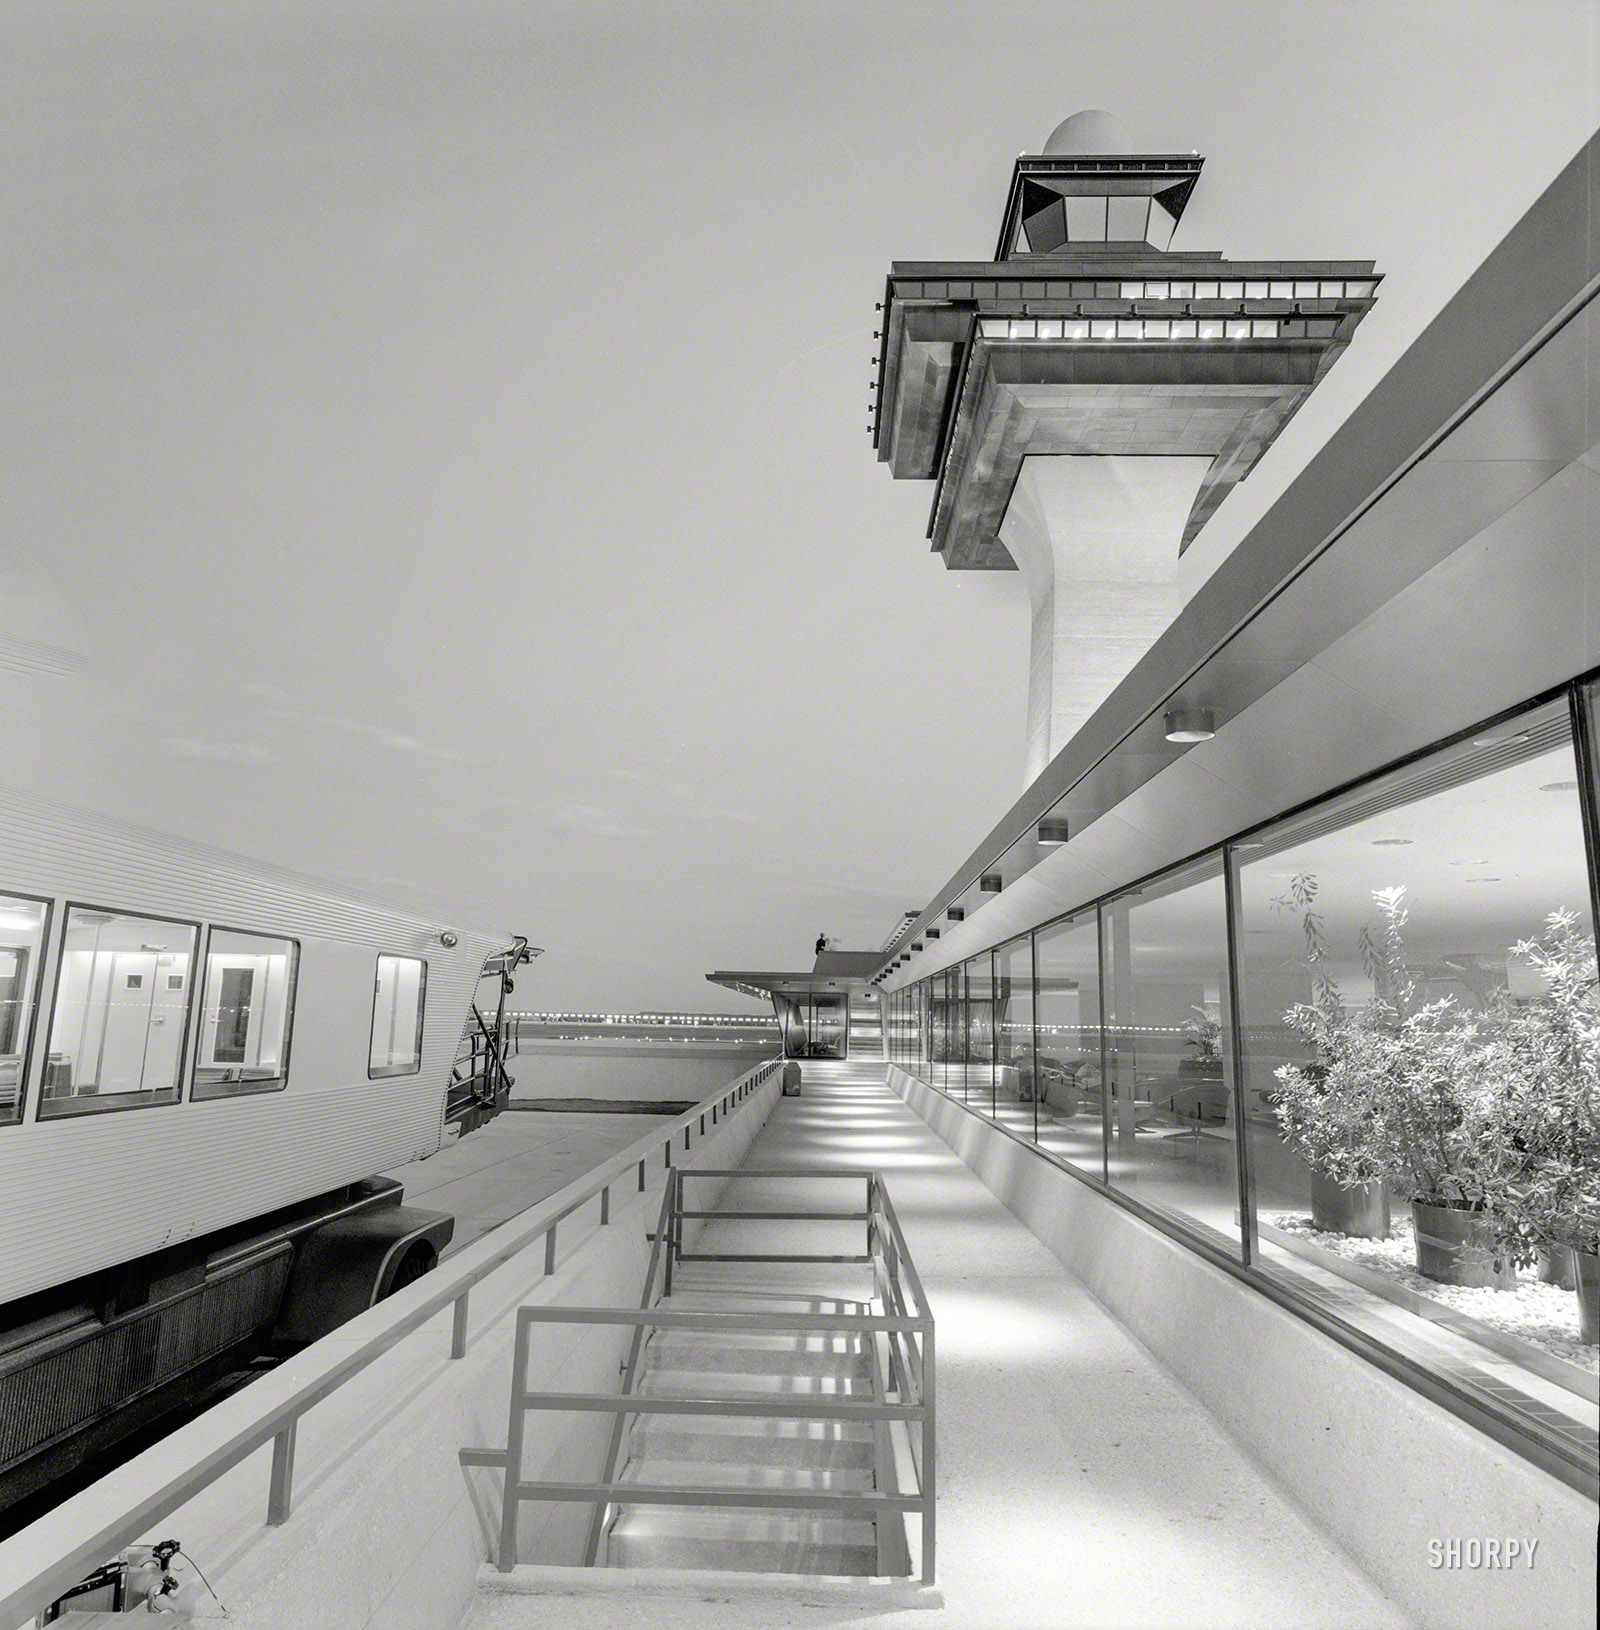 "Dulles International Airport, Chantilly, Virginia, 1958-63. Eero Saarinen, architect. Mobile lounge, control tower and terminal." All we need now is an airplane. Medium format negative by Balthazar Korab. View full size.